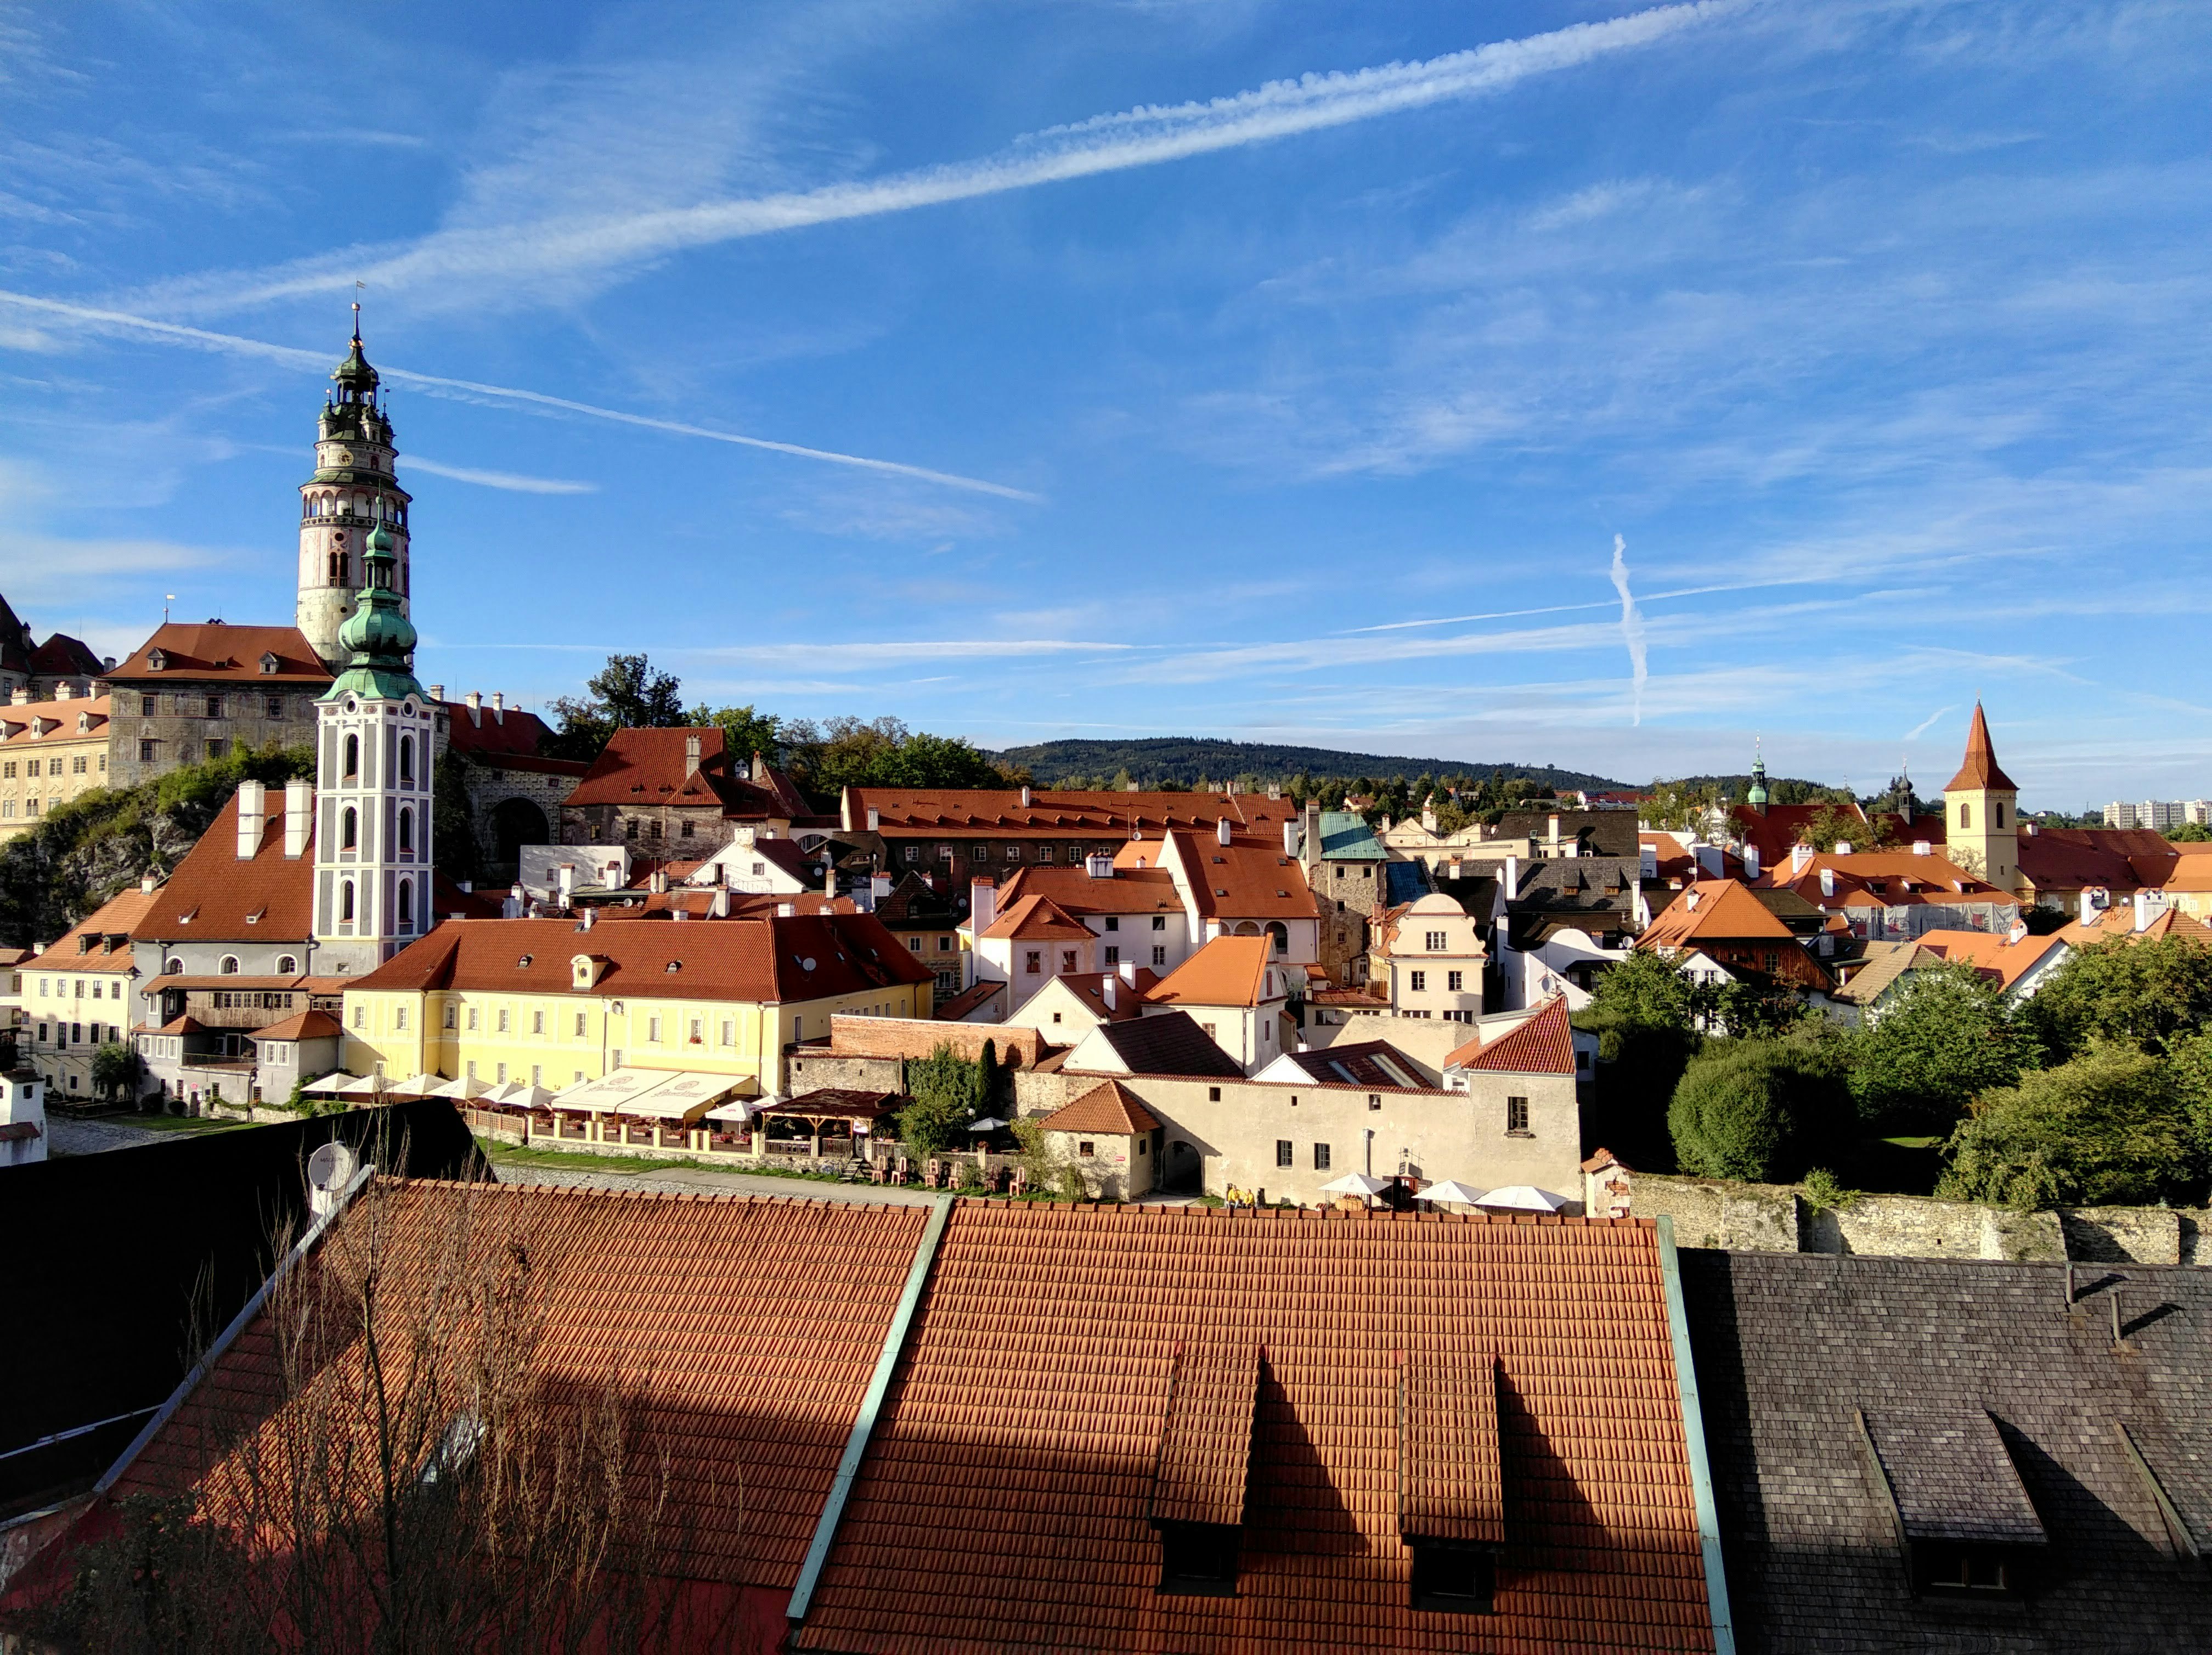 A view over the red-tiled rooftops of Český Krumlov on a sunny day.